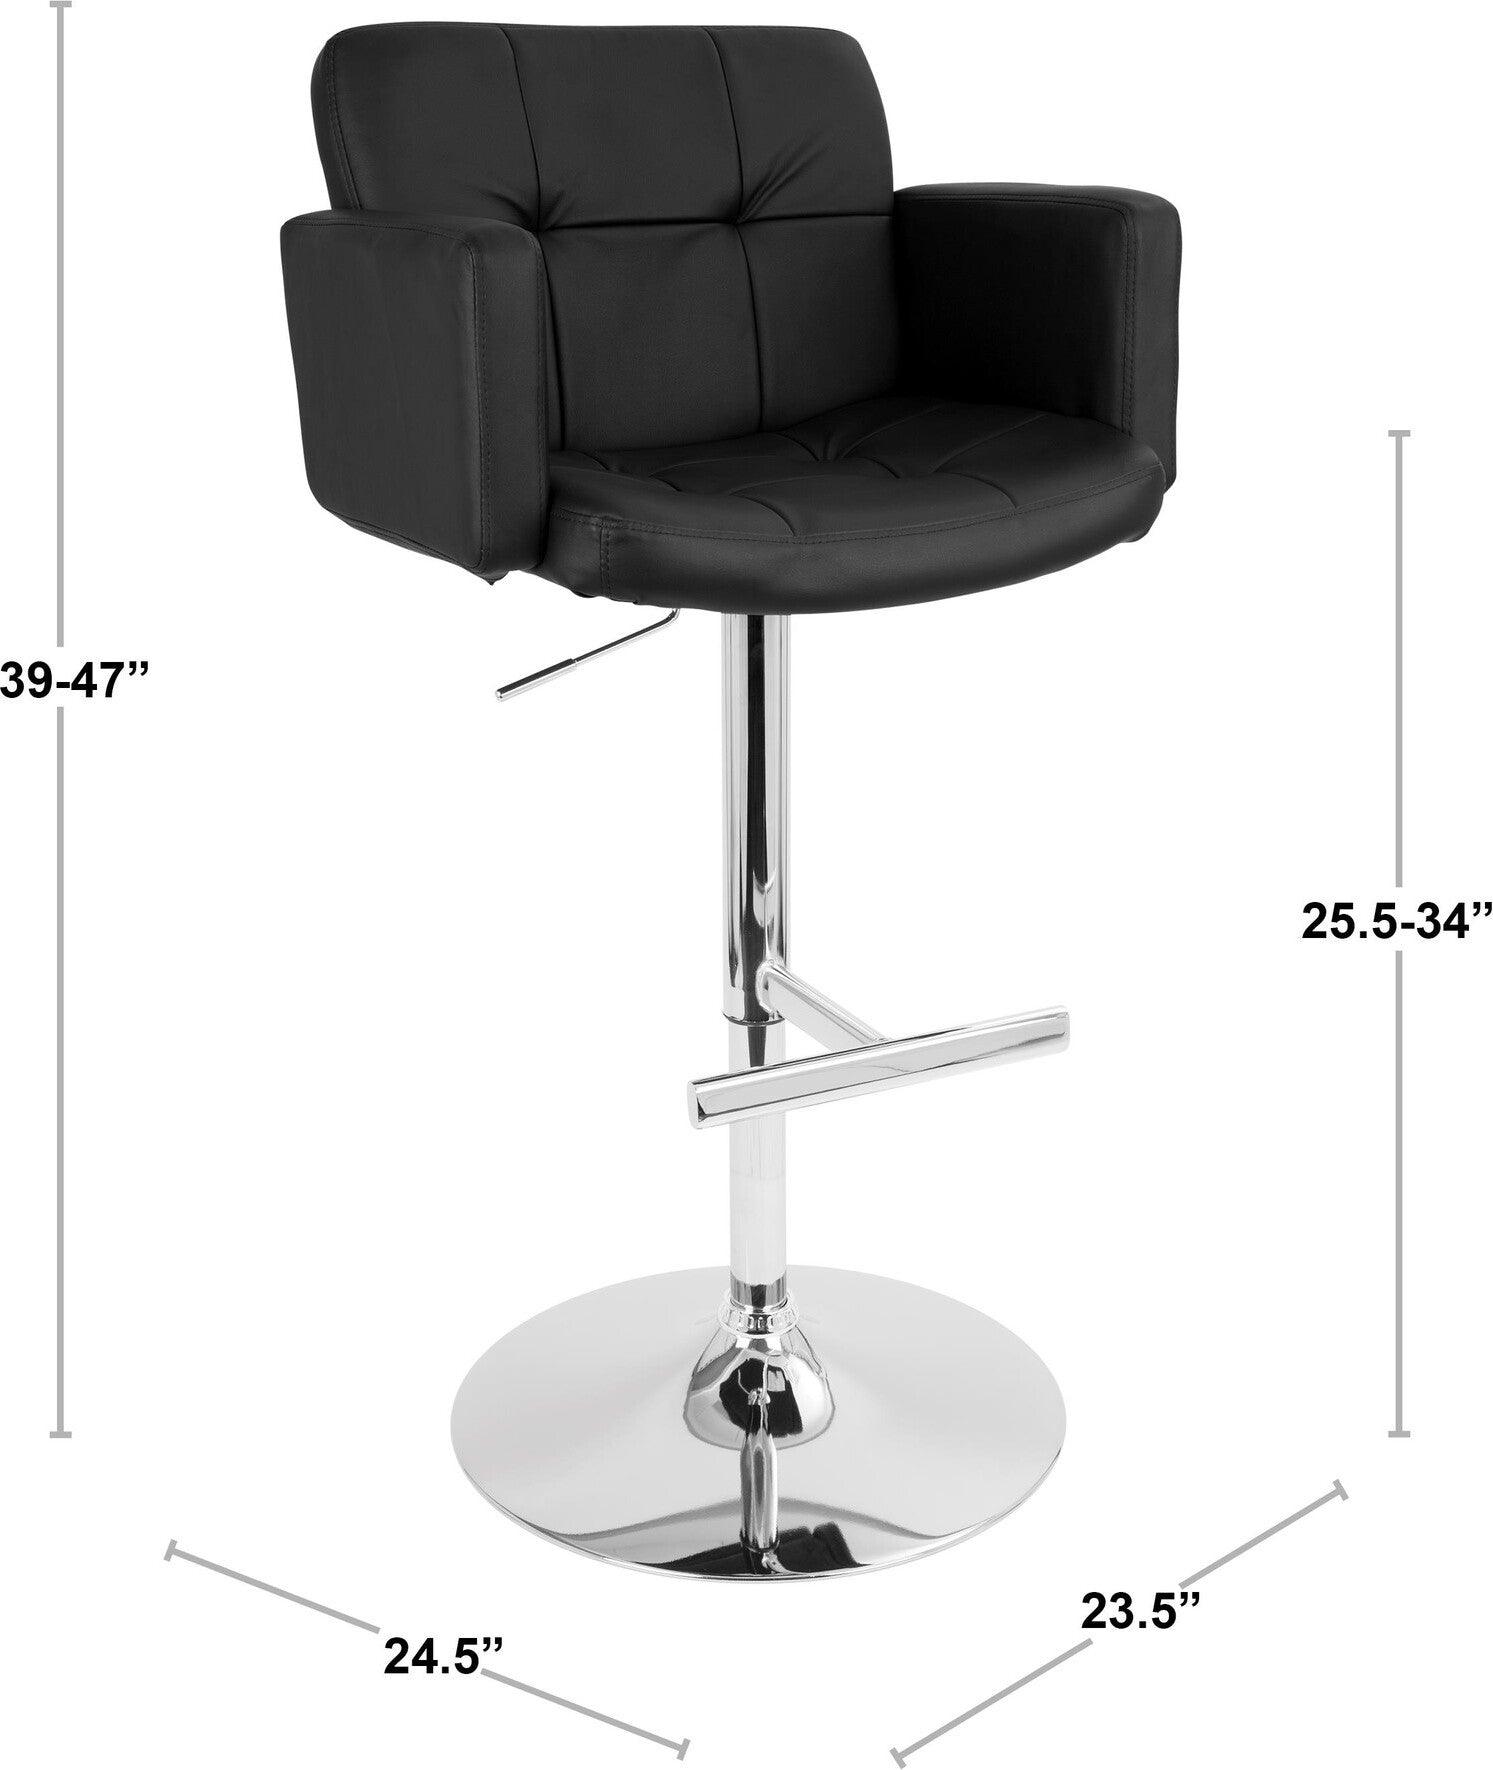 Lumisource Barstools - Stout Contemporary Adjustable Barstool with Swivel and Black Faux Leather